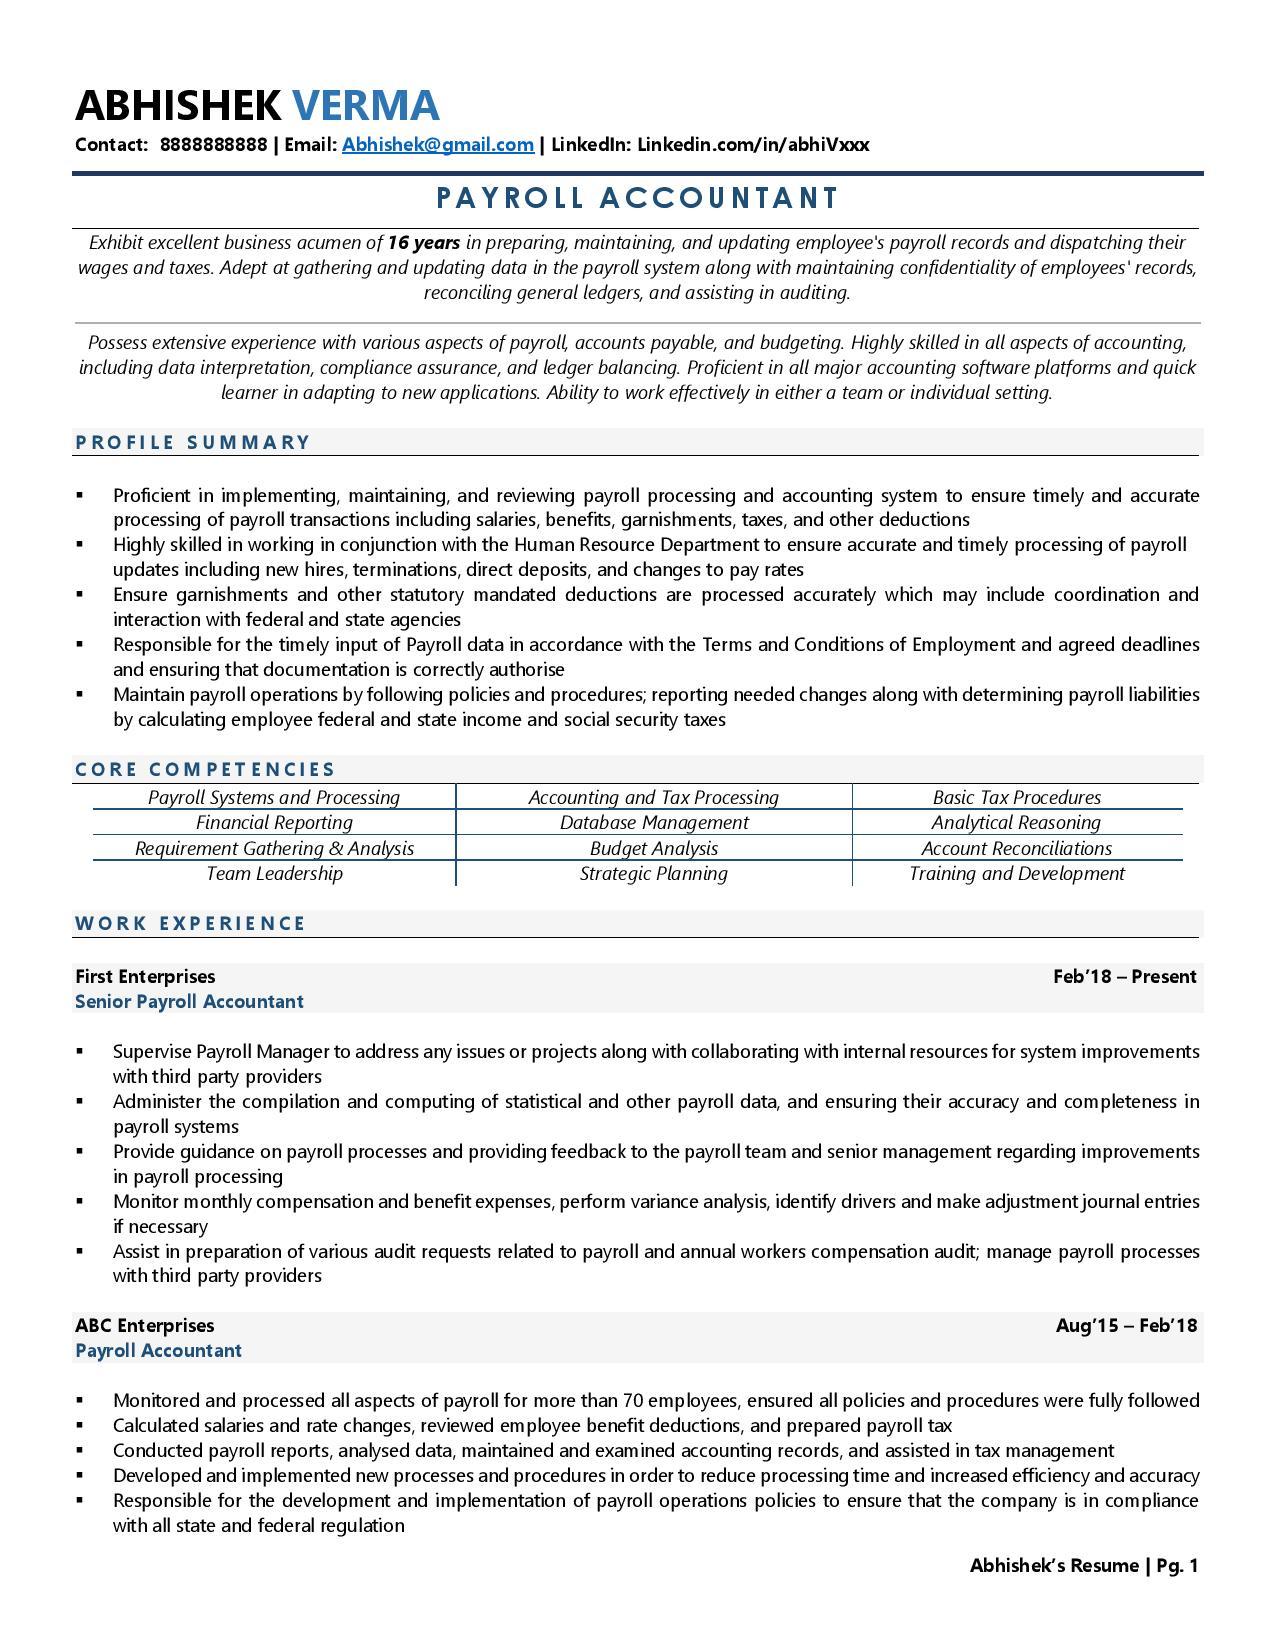 Payroll Accountant - Resume Example & Template